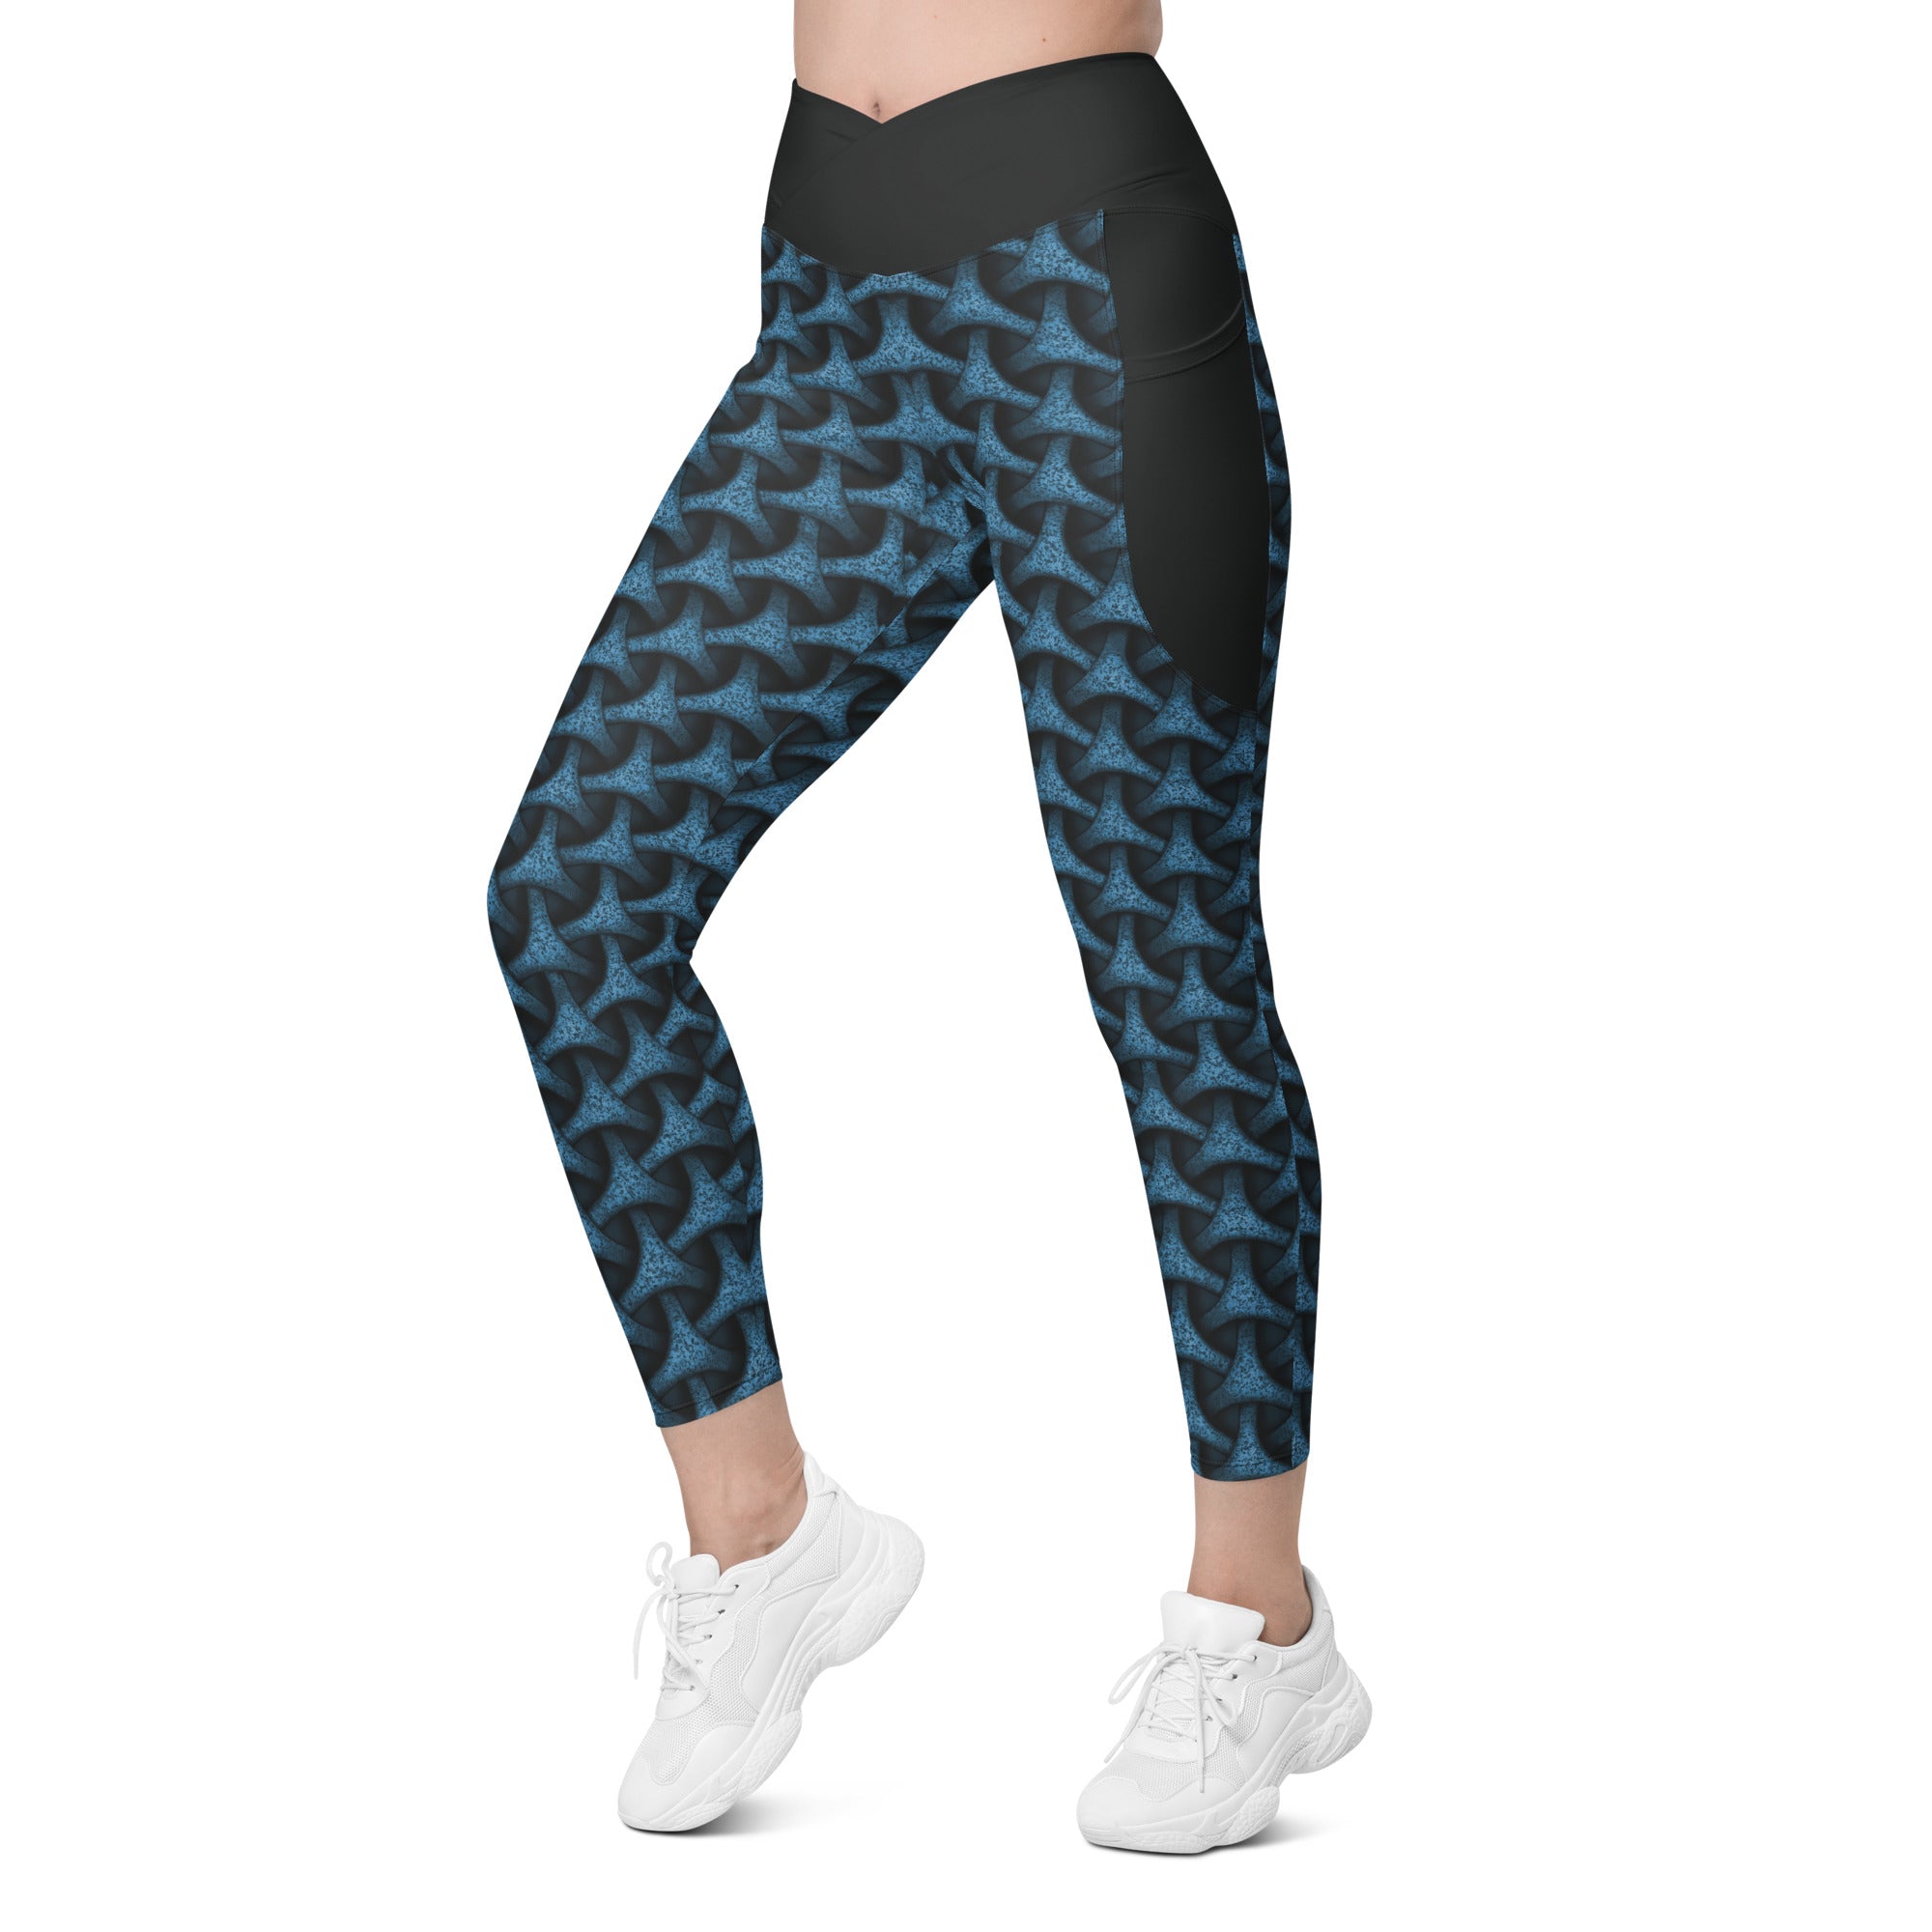 Galactic Glow Tristar Leggings with pockets, perfect for carrying essentials on a run.